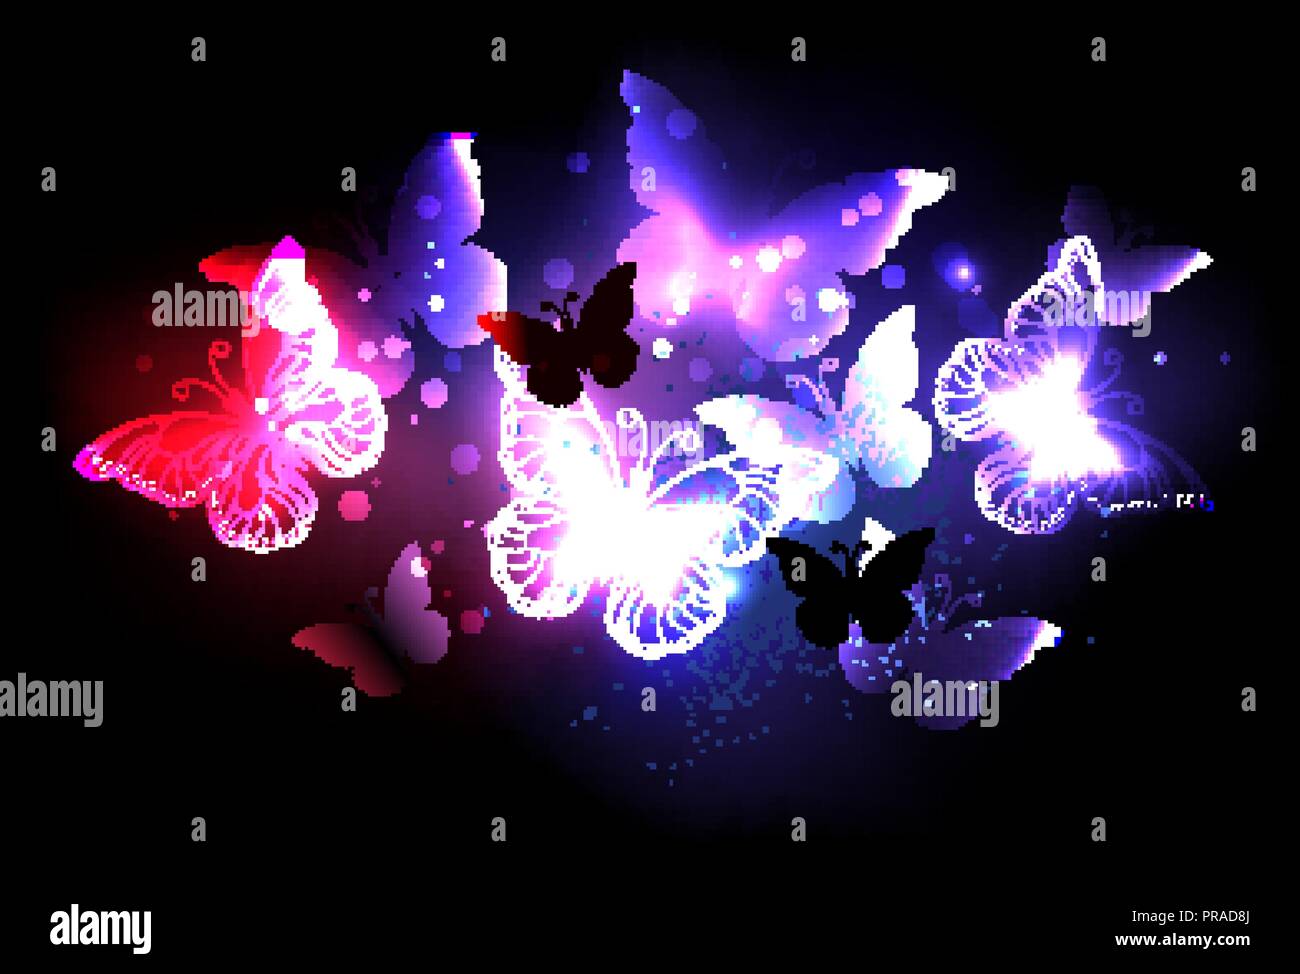 Swarm of glowing night butterflies on  night, black background. Stock Vector